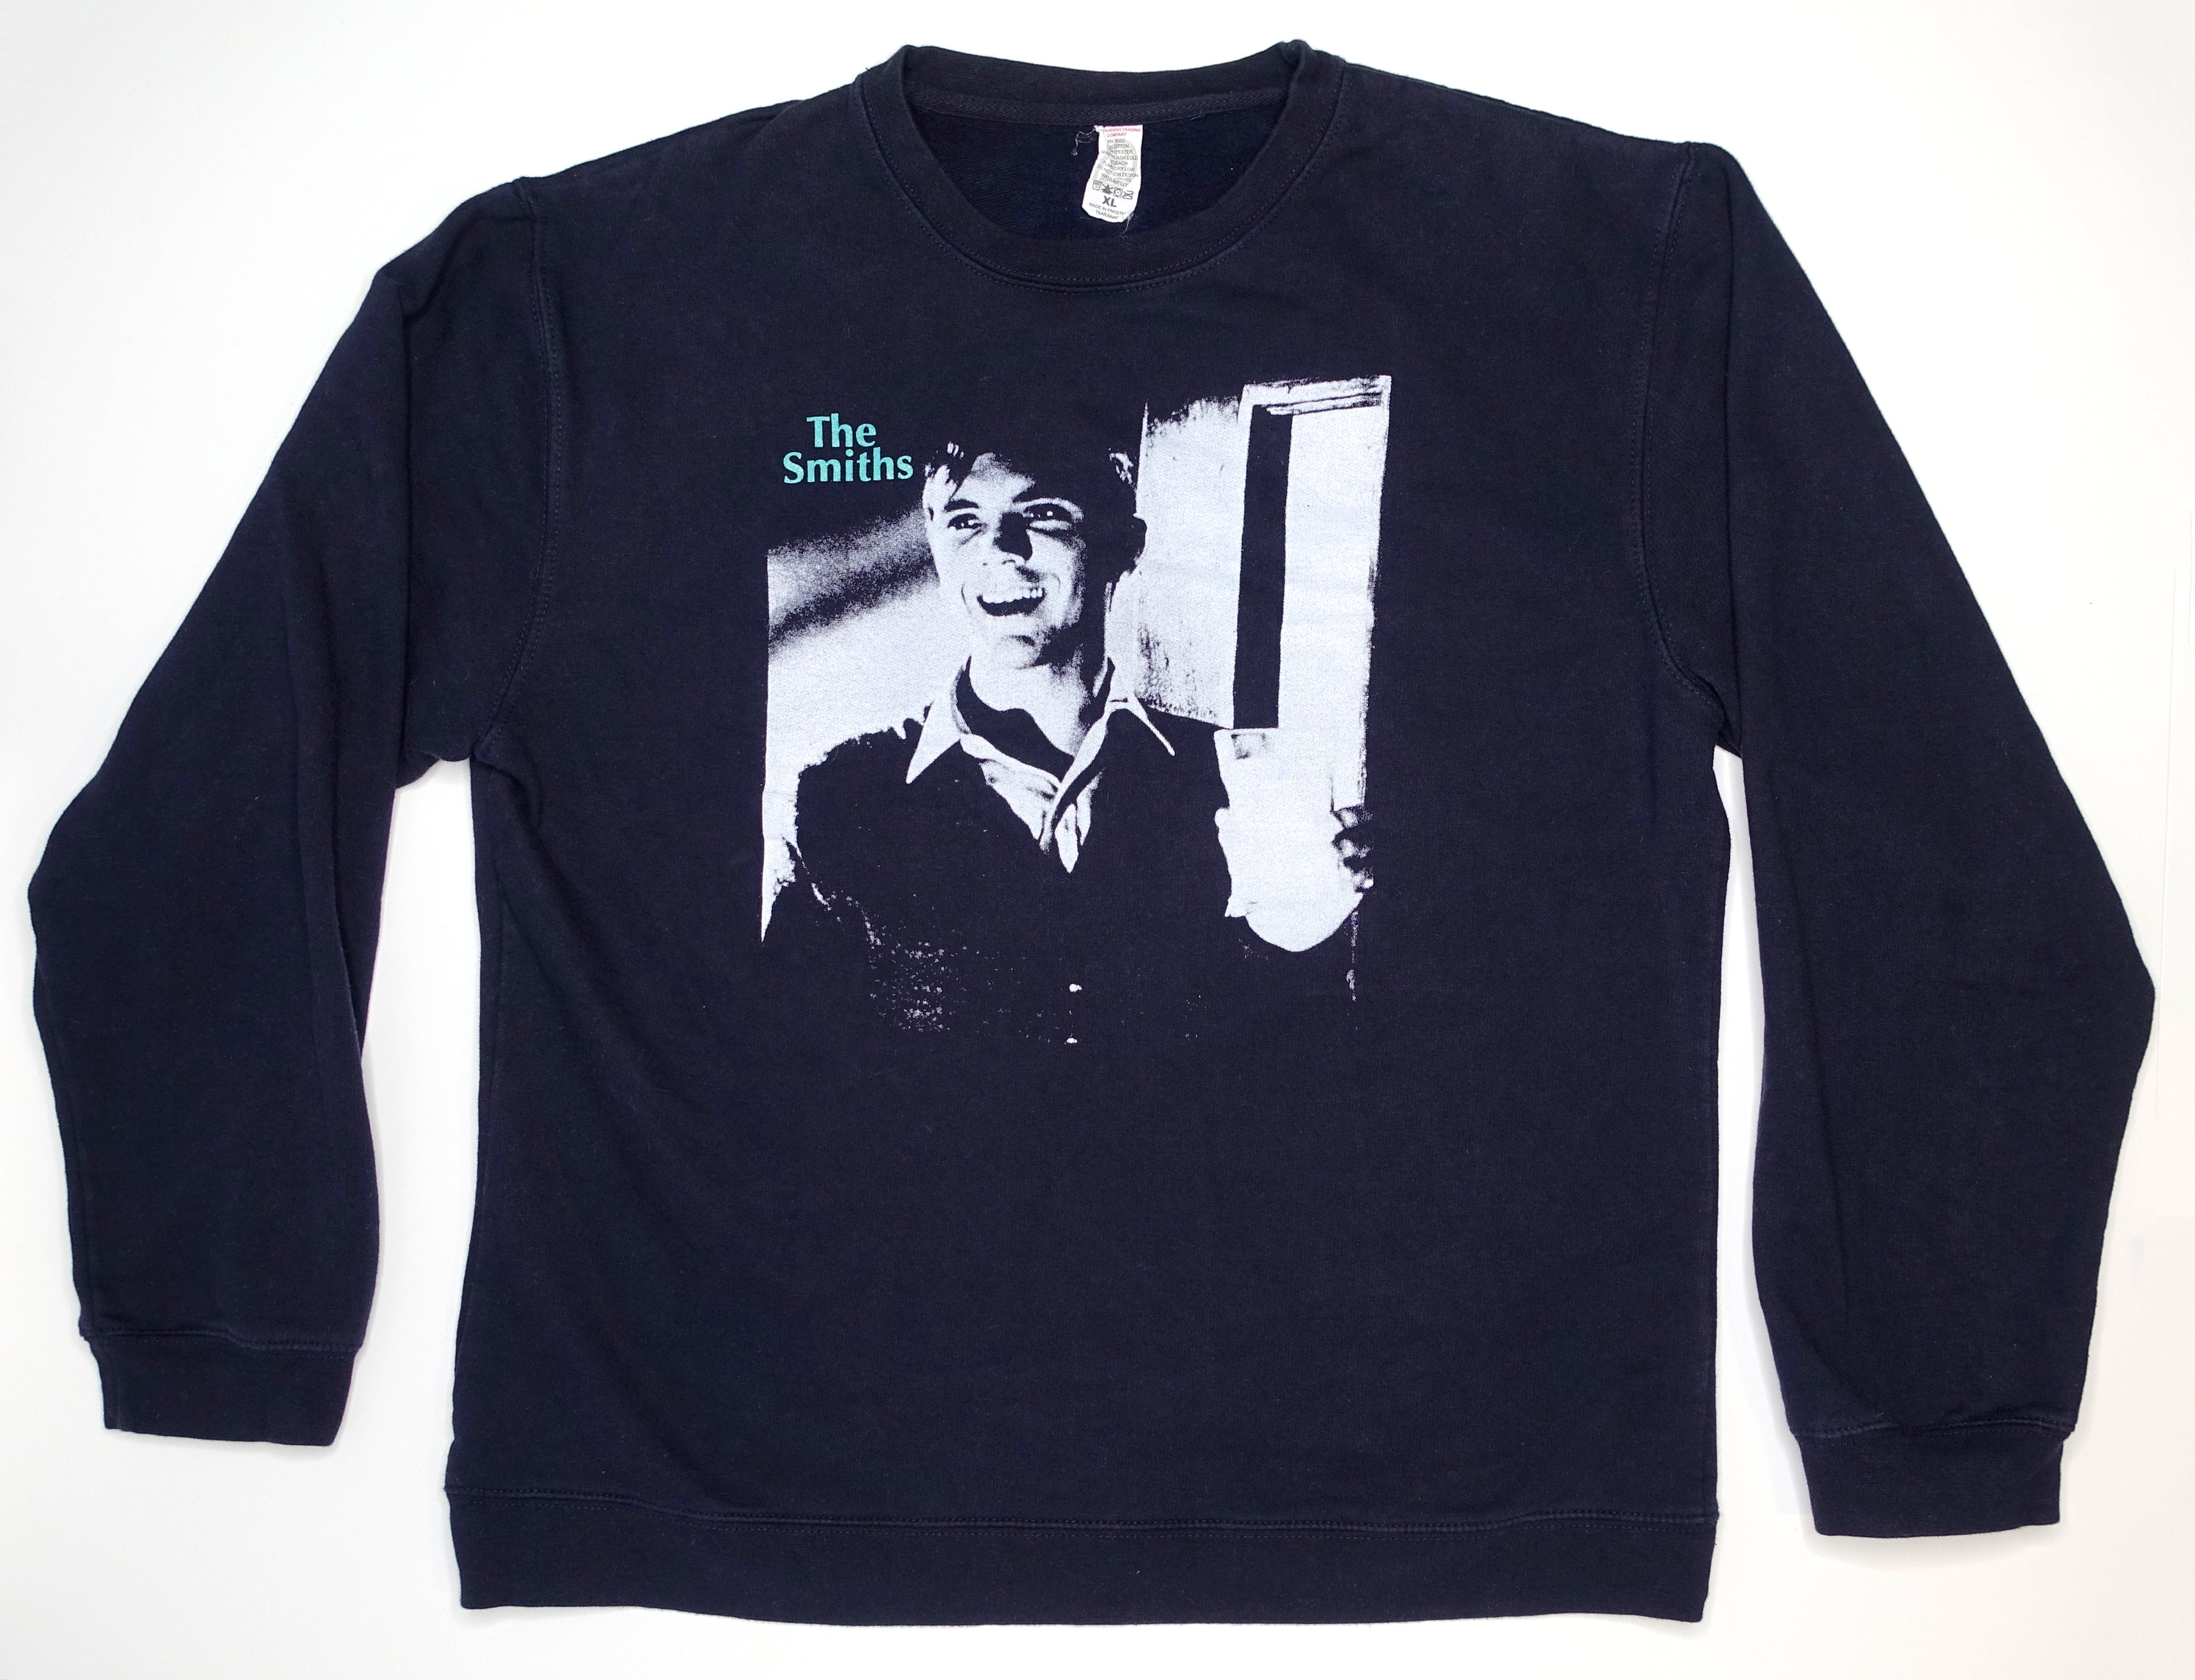 the Smiths - What Difference Does It Make? Navy Sweat Shirt (Bootleg by Me) Size XL